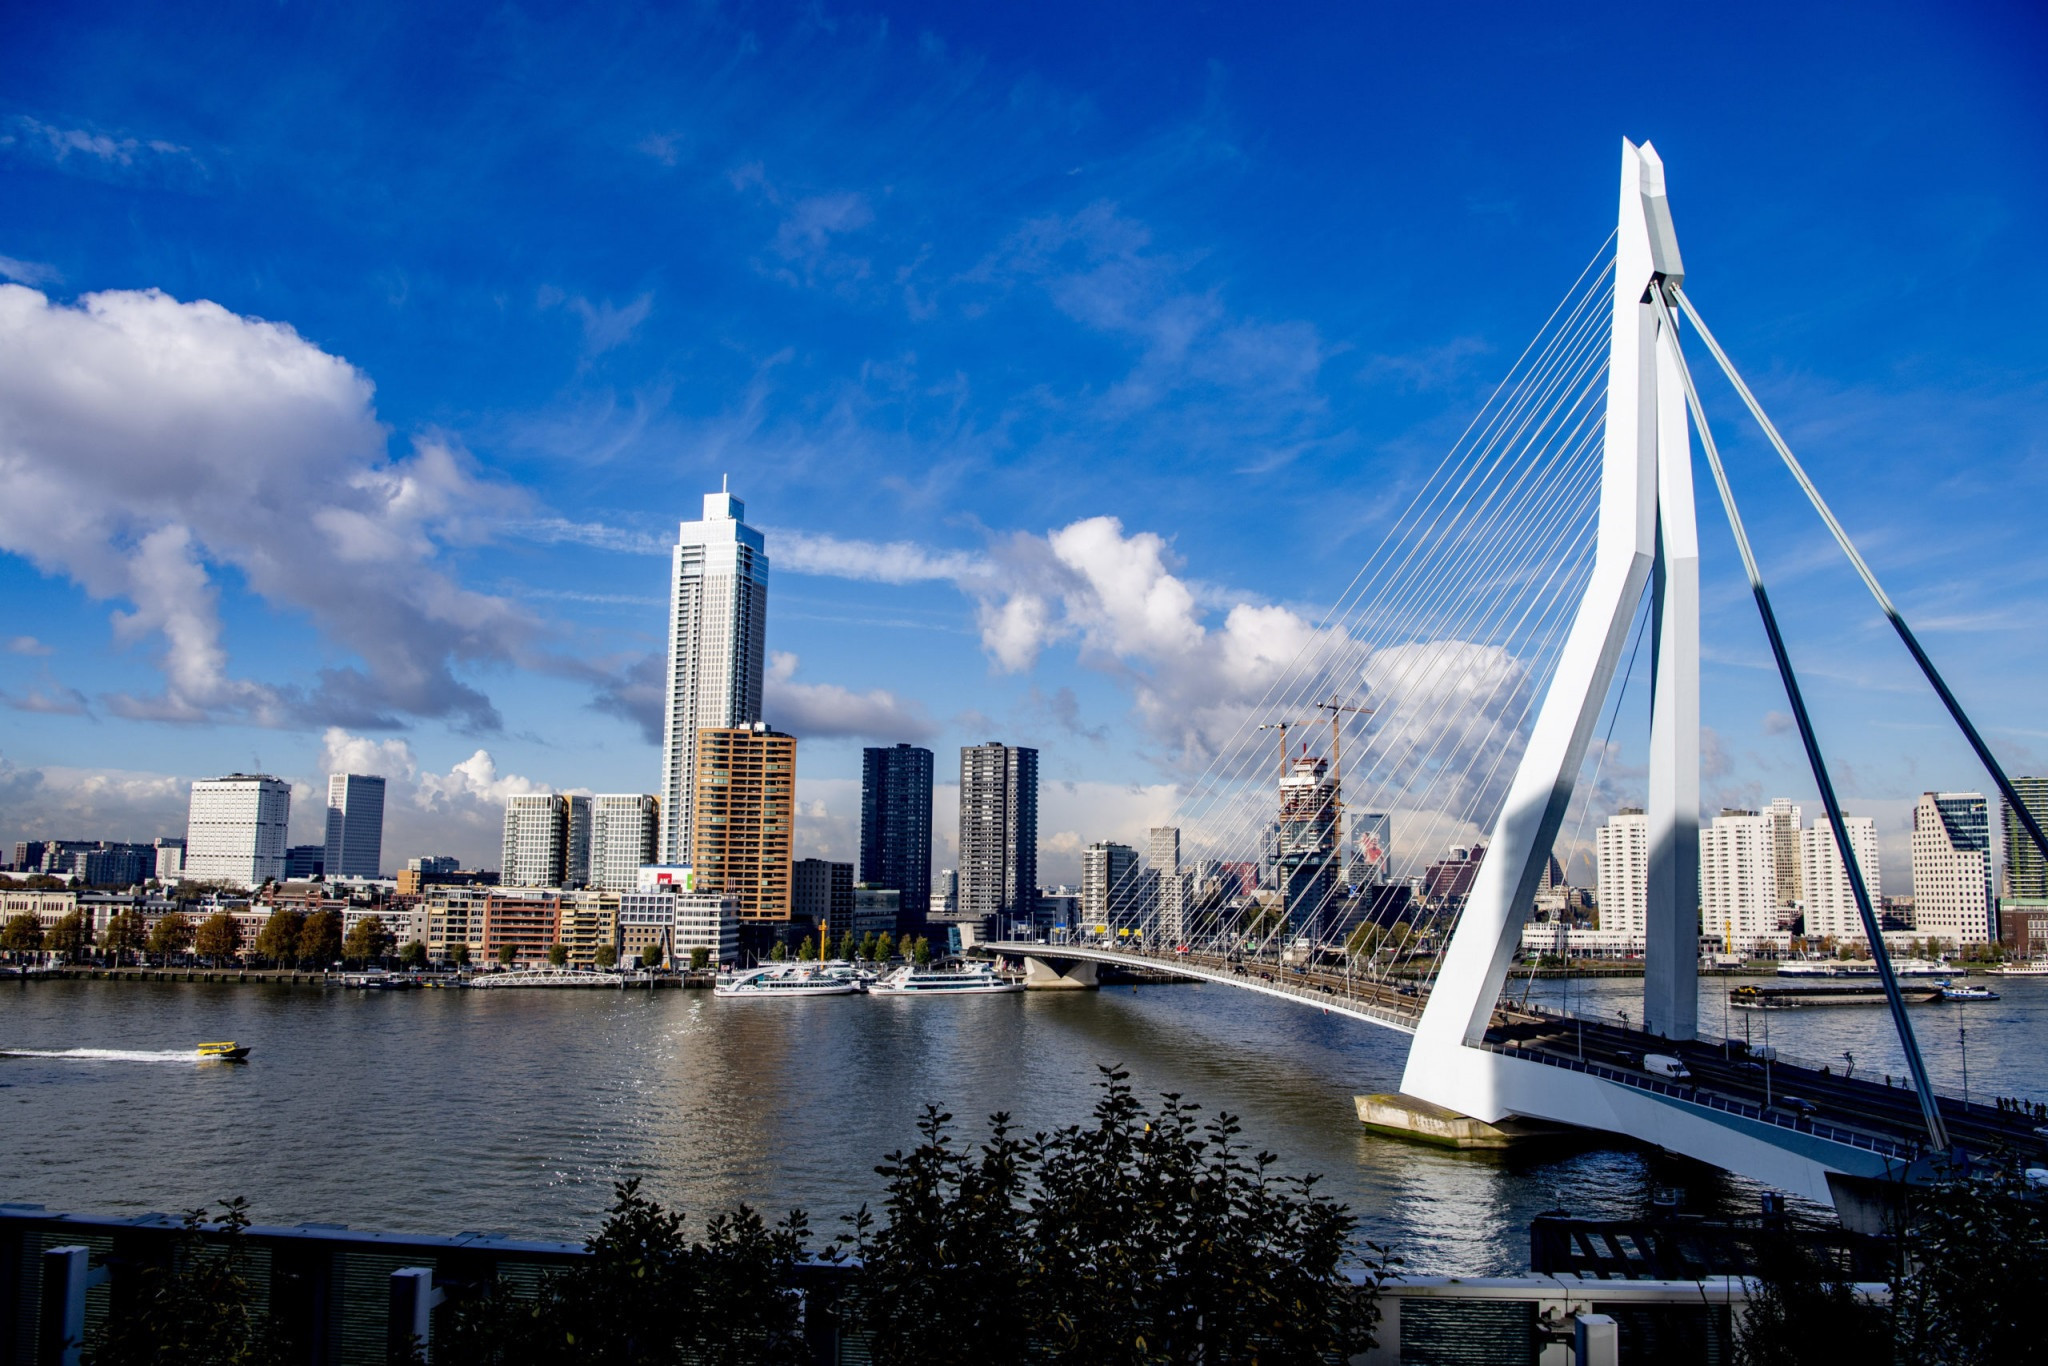 Rotterdam is due to stage the first-ever European Para Championships ©European Para Championships